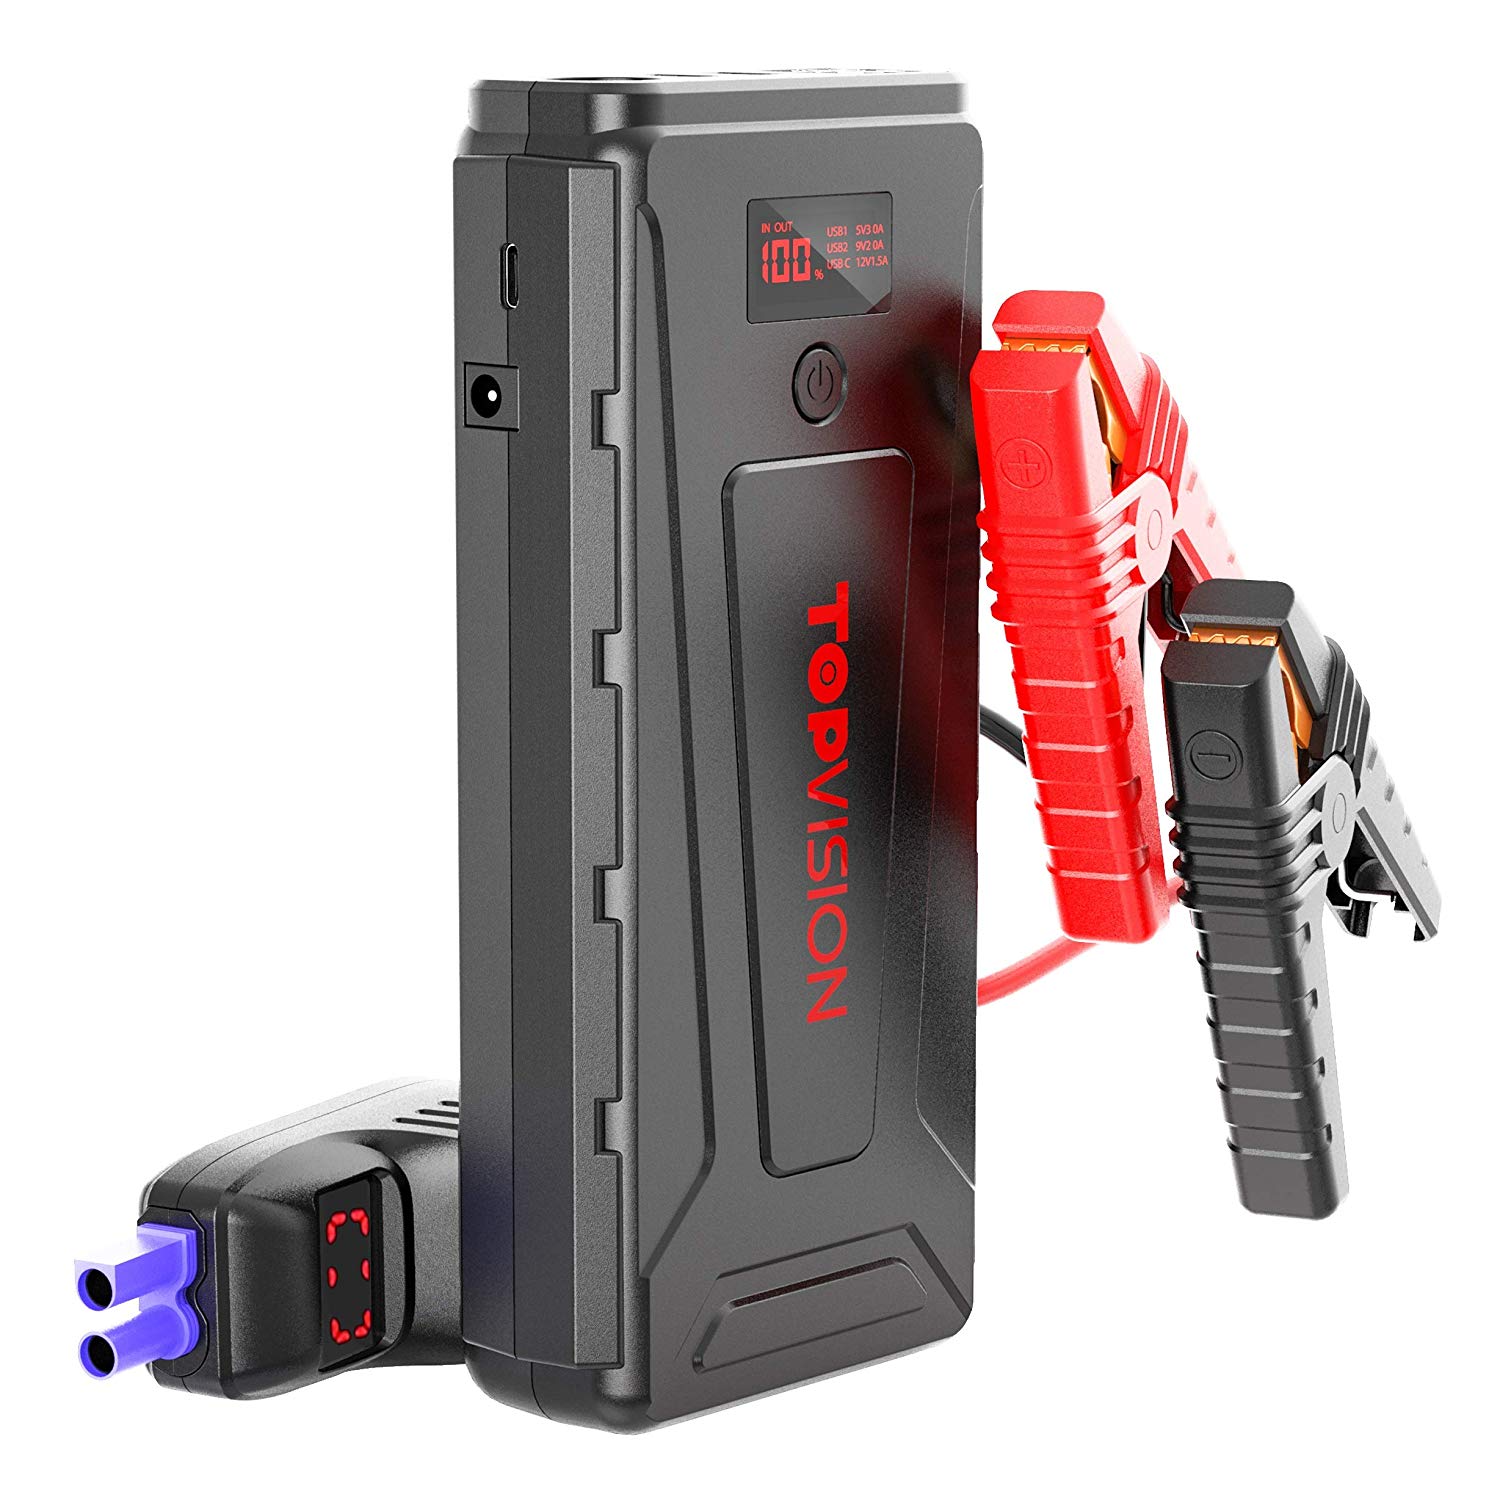 Lithium Ion Car Battery  Jump Starter , TOPVISION 2200A Peak 21800mAh Portable Power Pack with USB Quick Charge 3.0, $89.99 - 30% off coupon= $62.99